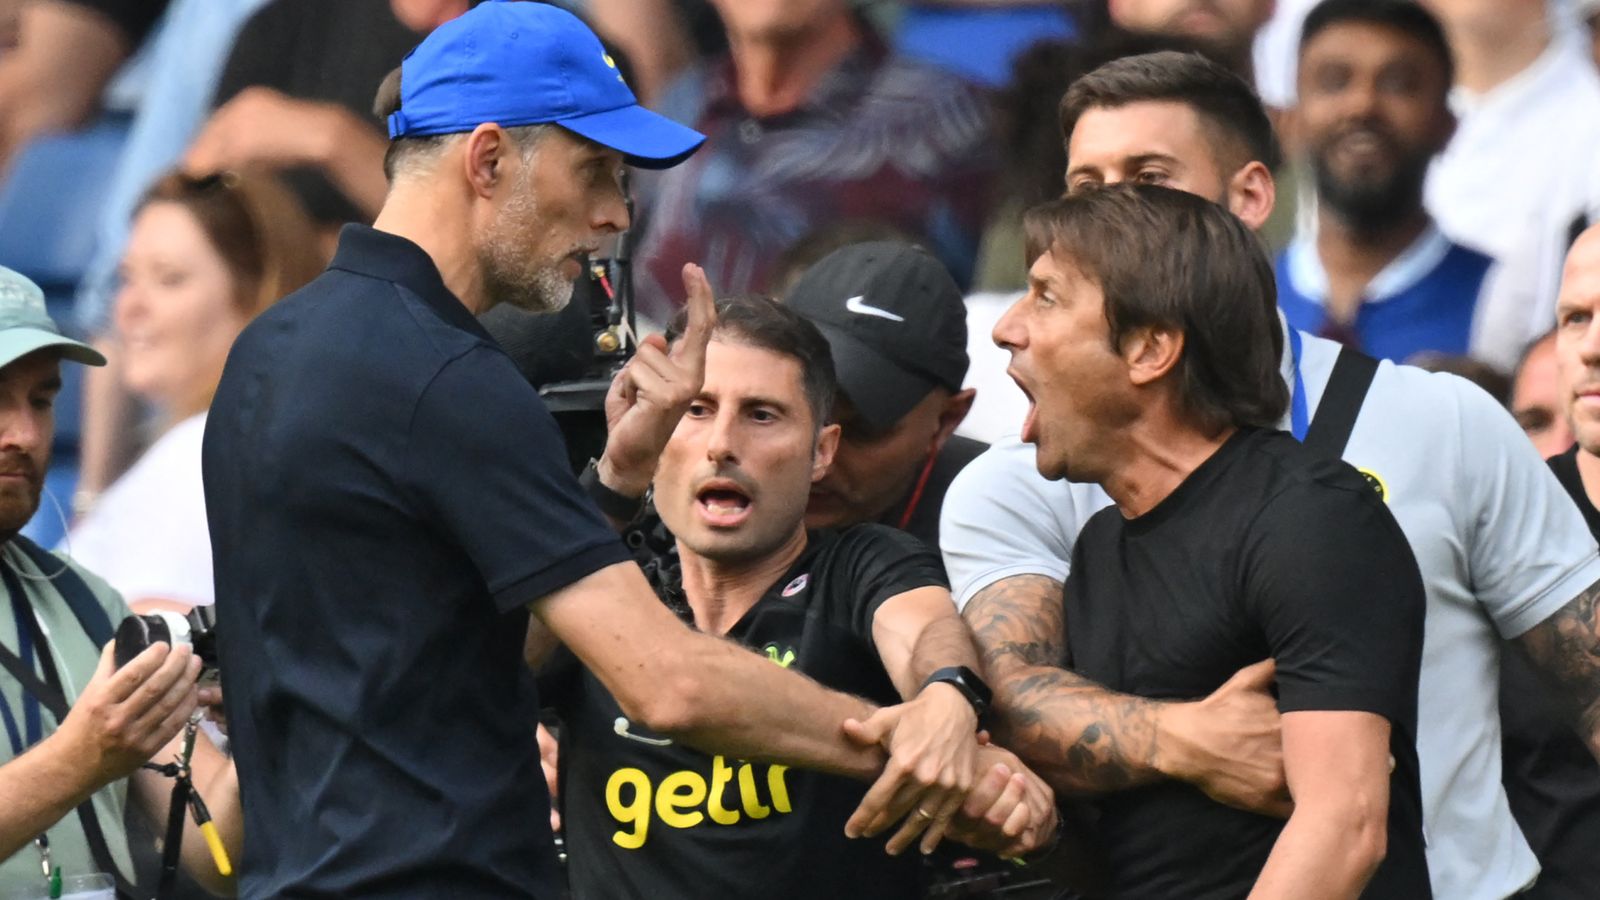 Thomas Tuchel: Chelsea boss handed one-match touchline ban and £35,000 fine for ..